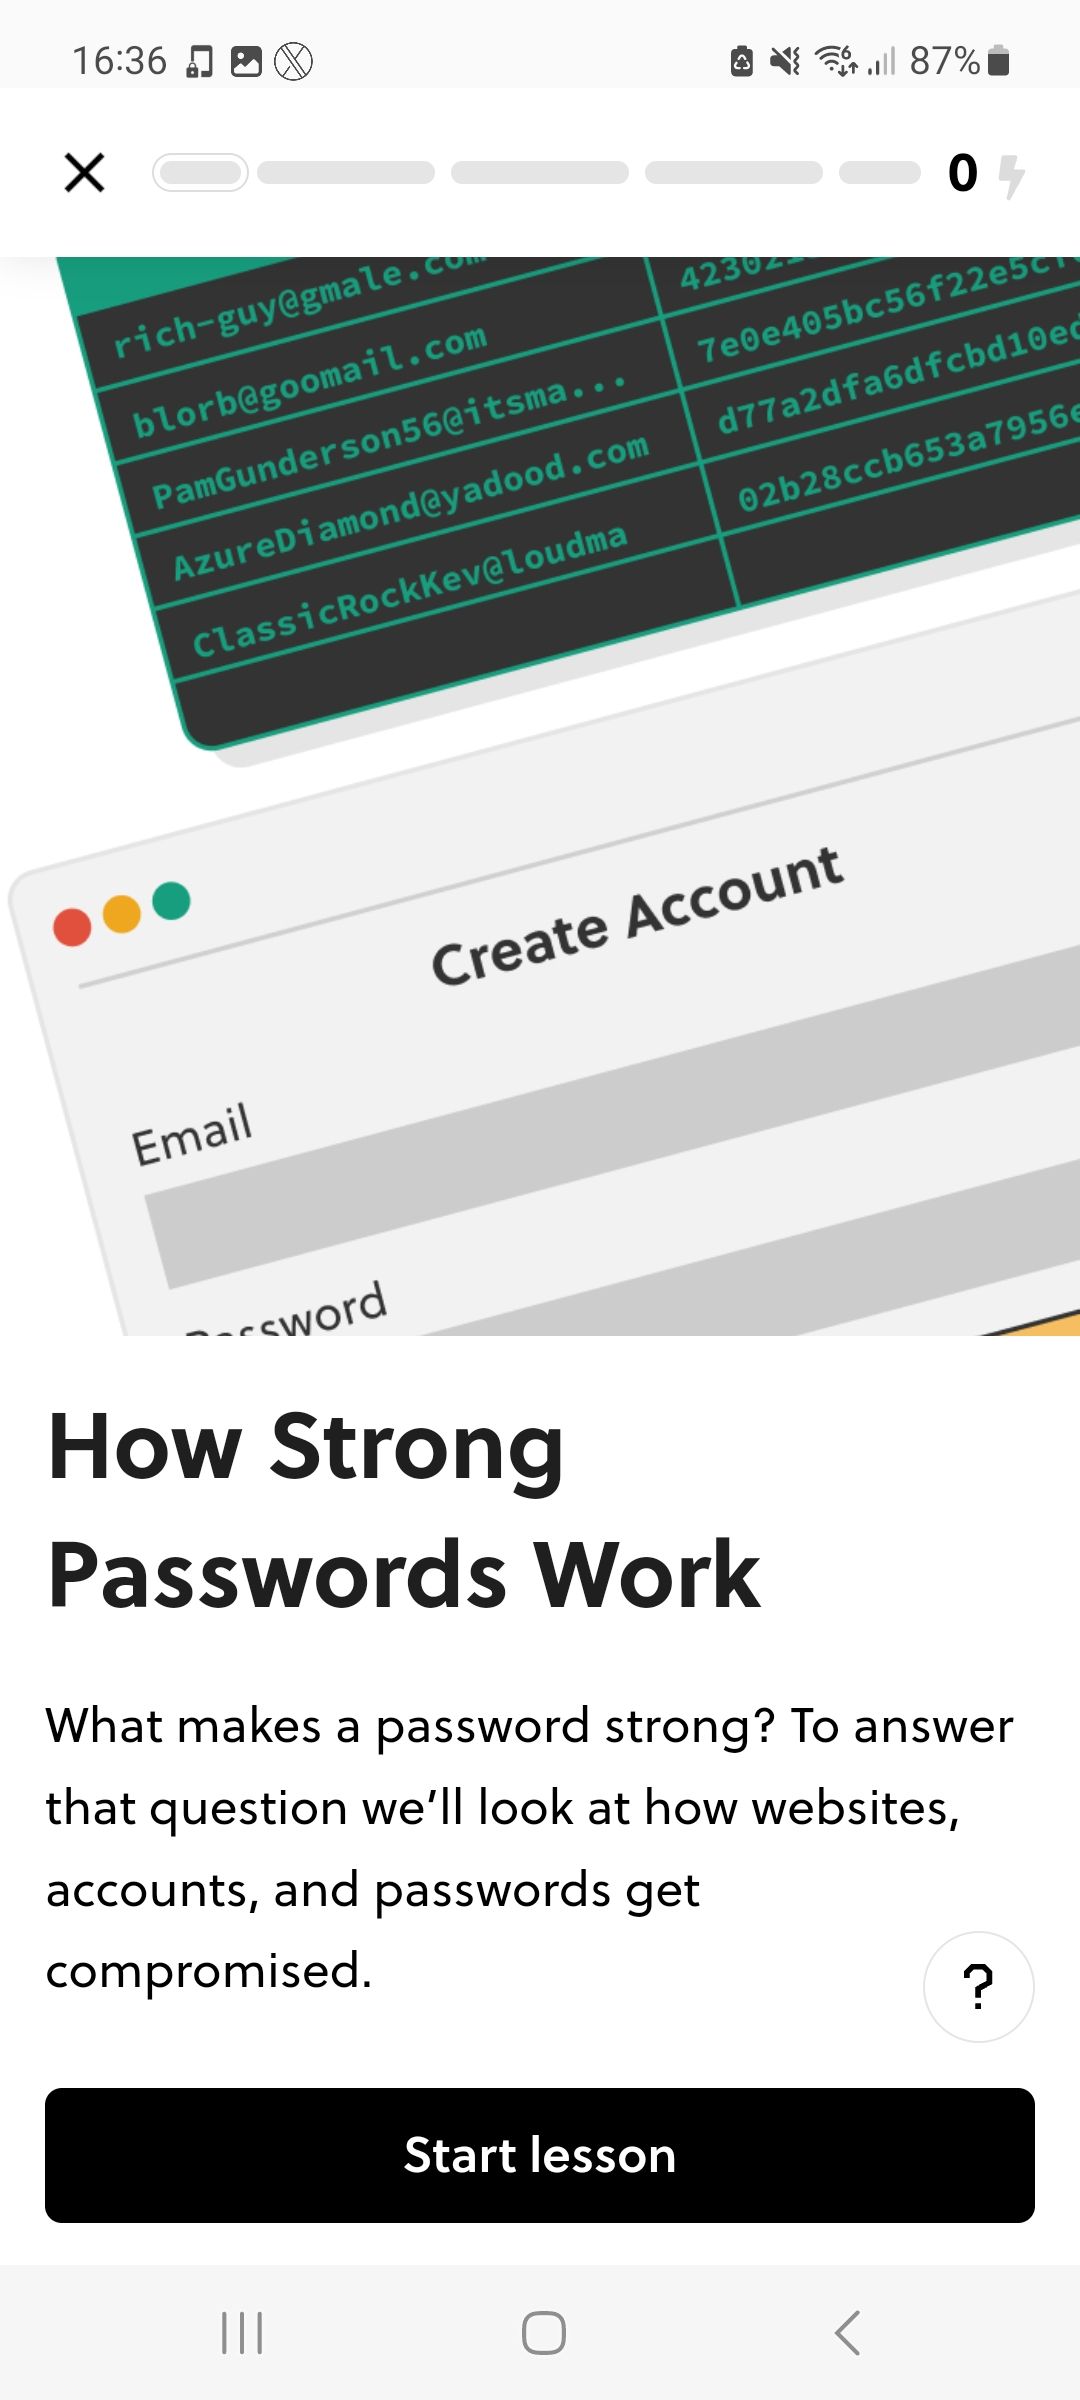 How strong passwords work course in Brilliant